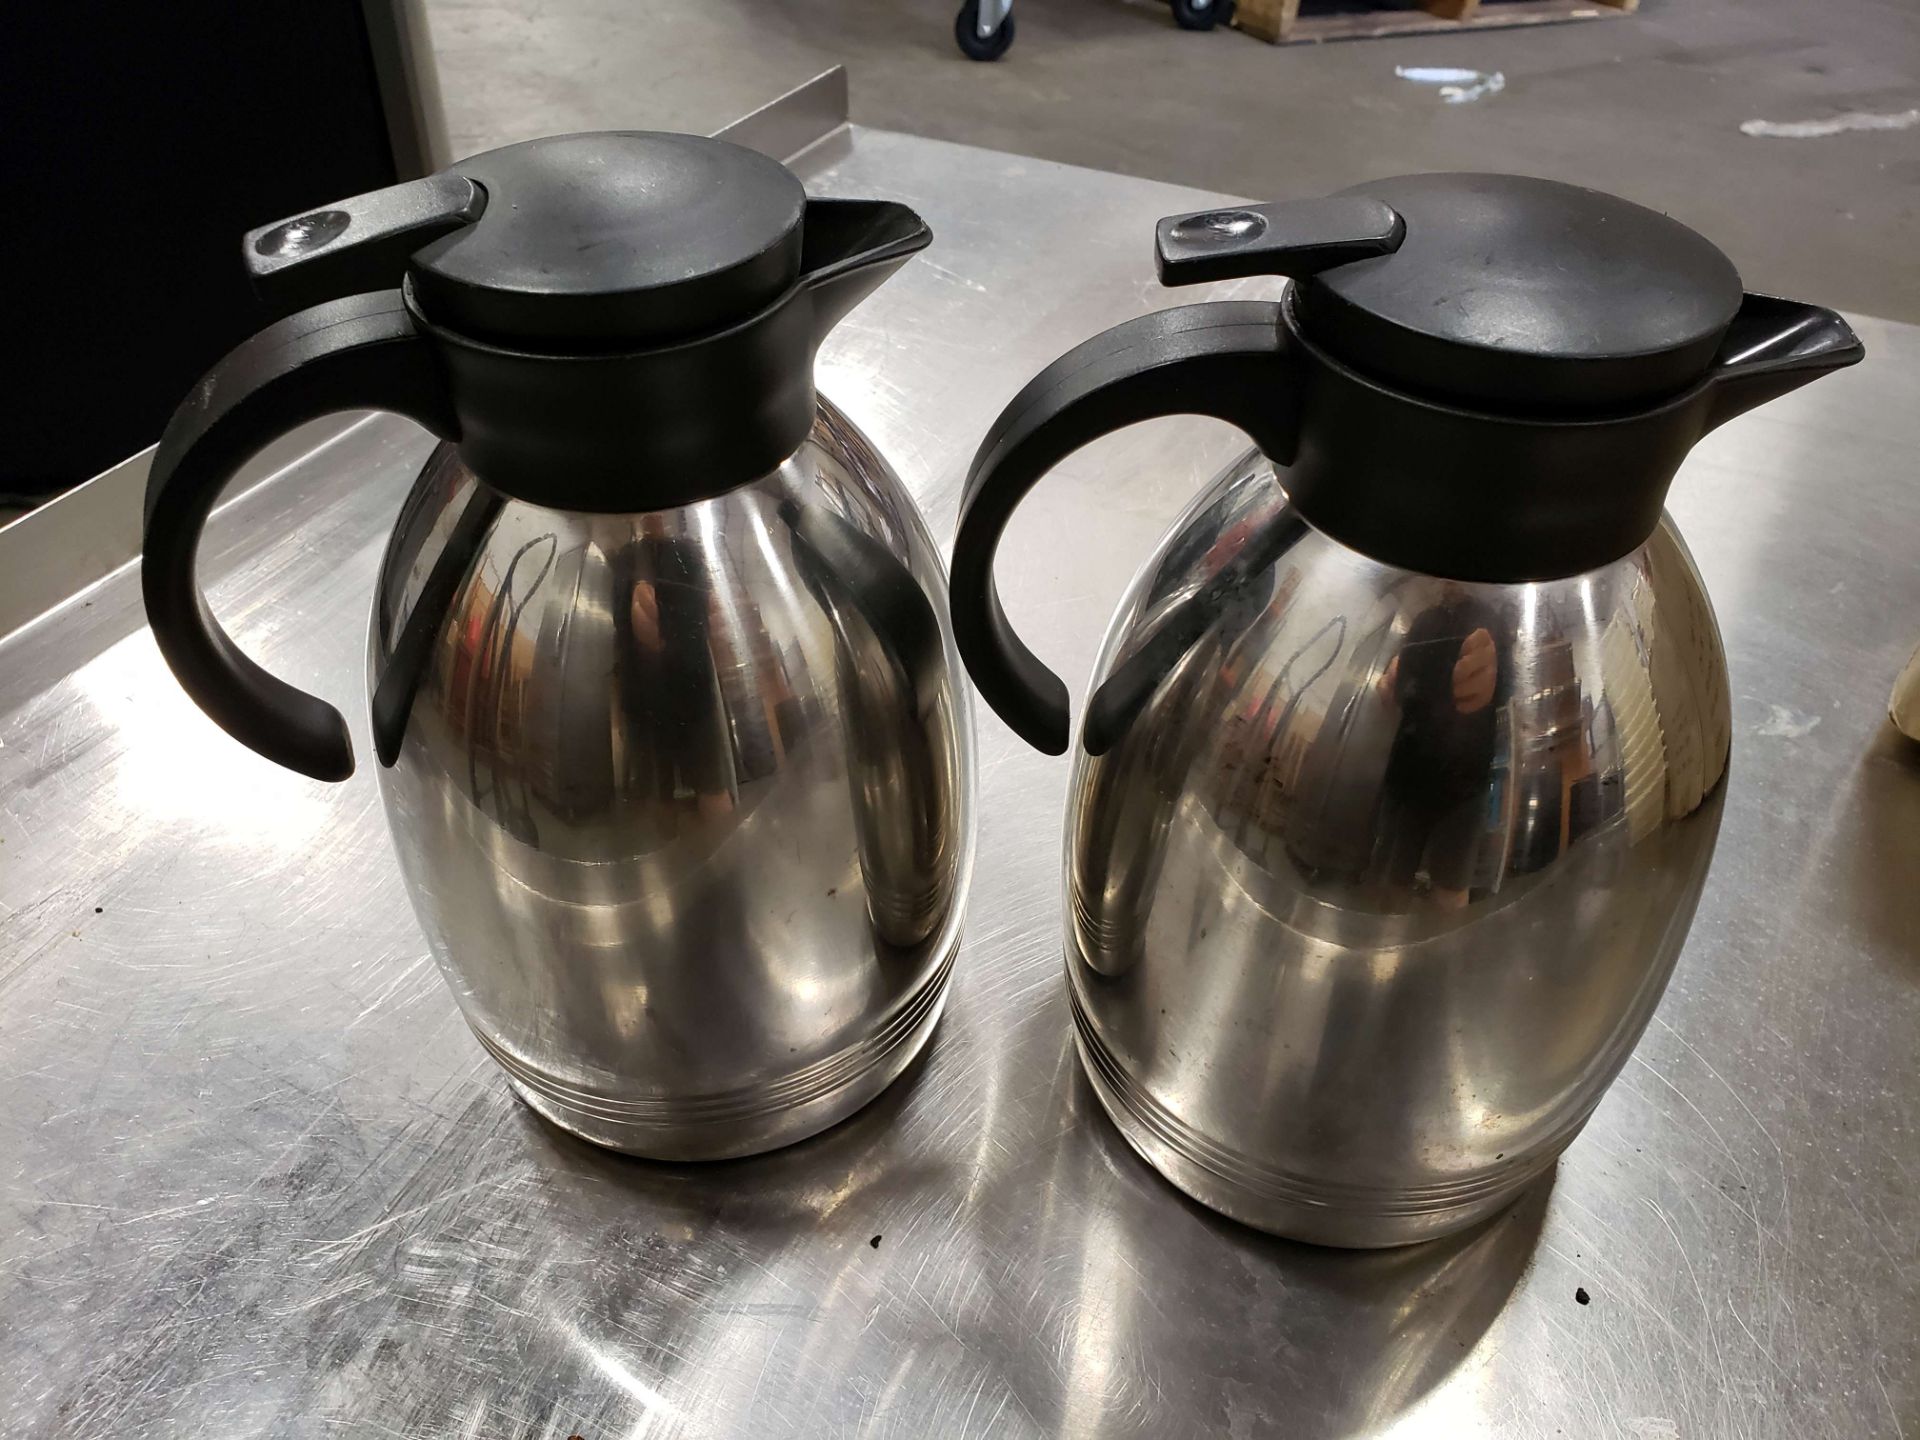 Stainless 1.8LT Insulated Servers - Lot of 2